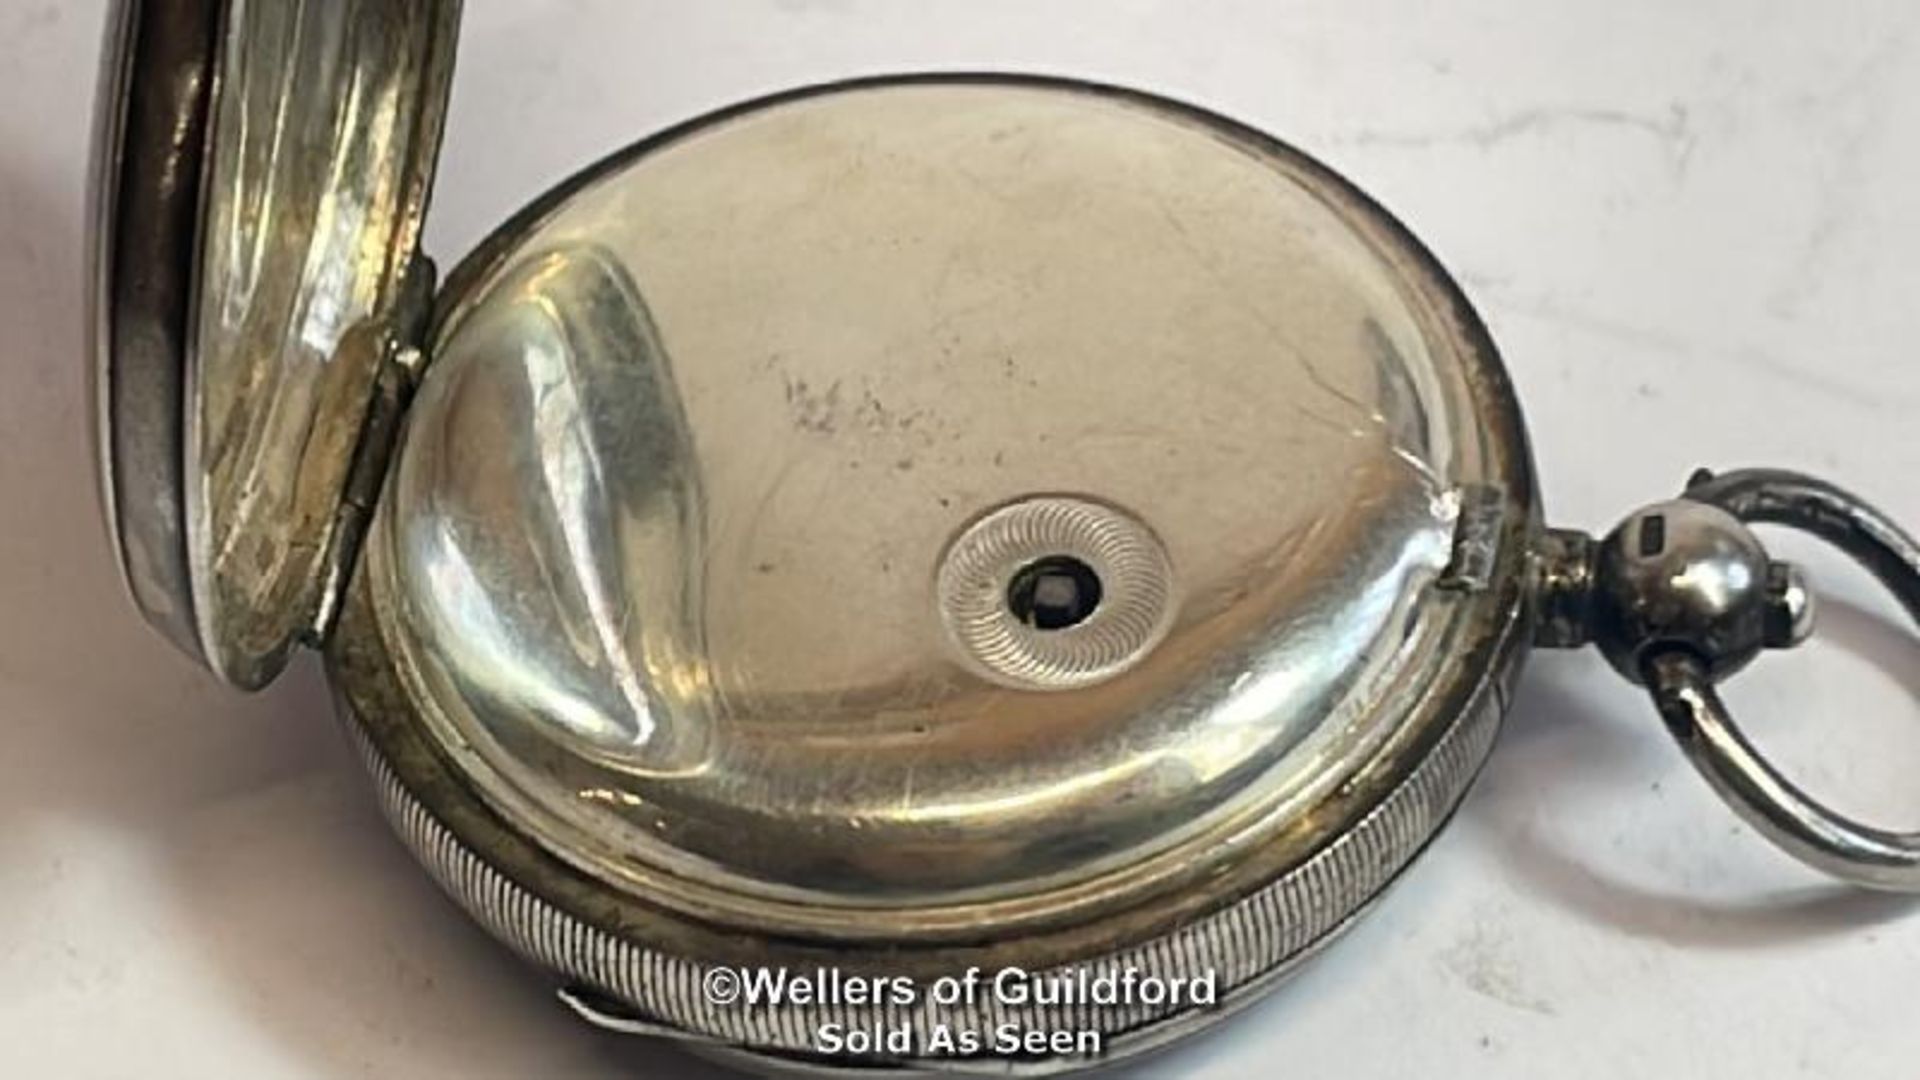 Hallmarked silver cased pocket watch "The Franklin" by John Myers & Co. Westminster Bridge Rd no. - Image 7 of 8